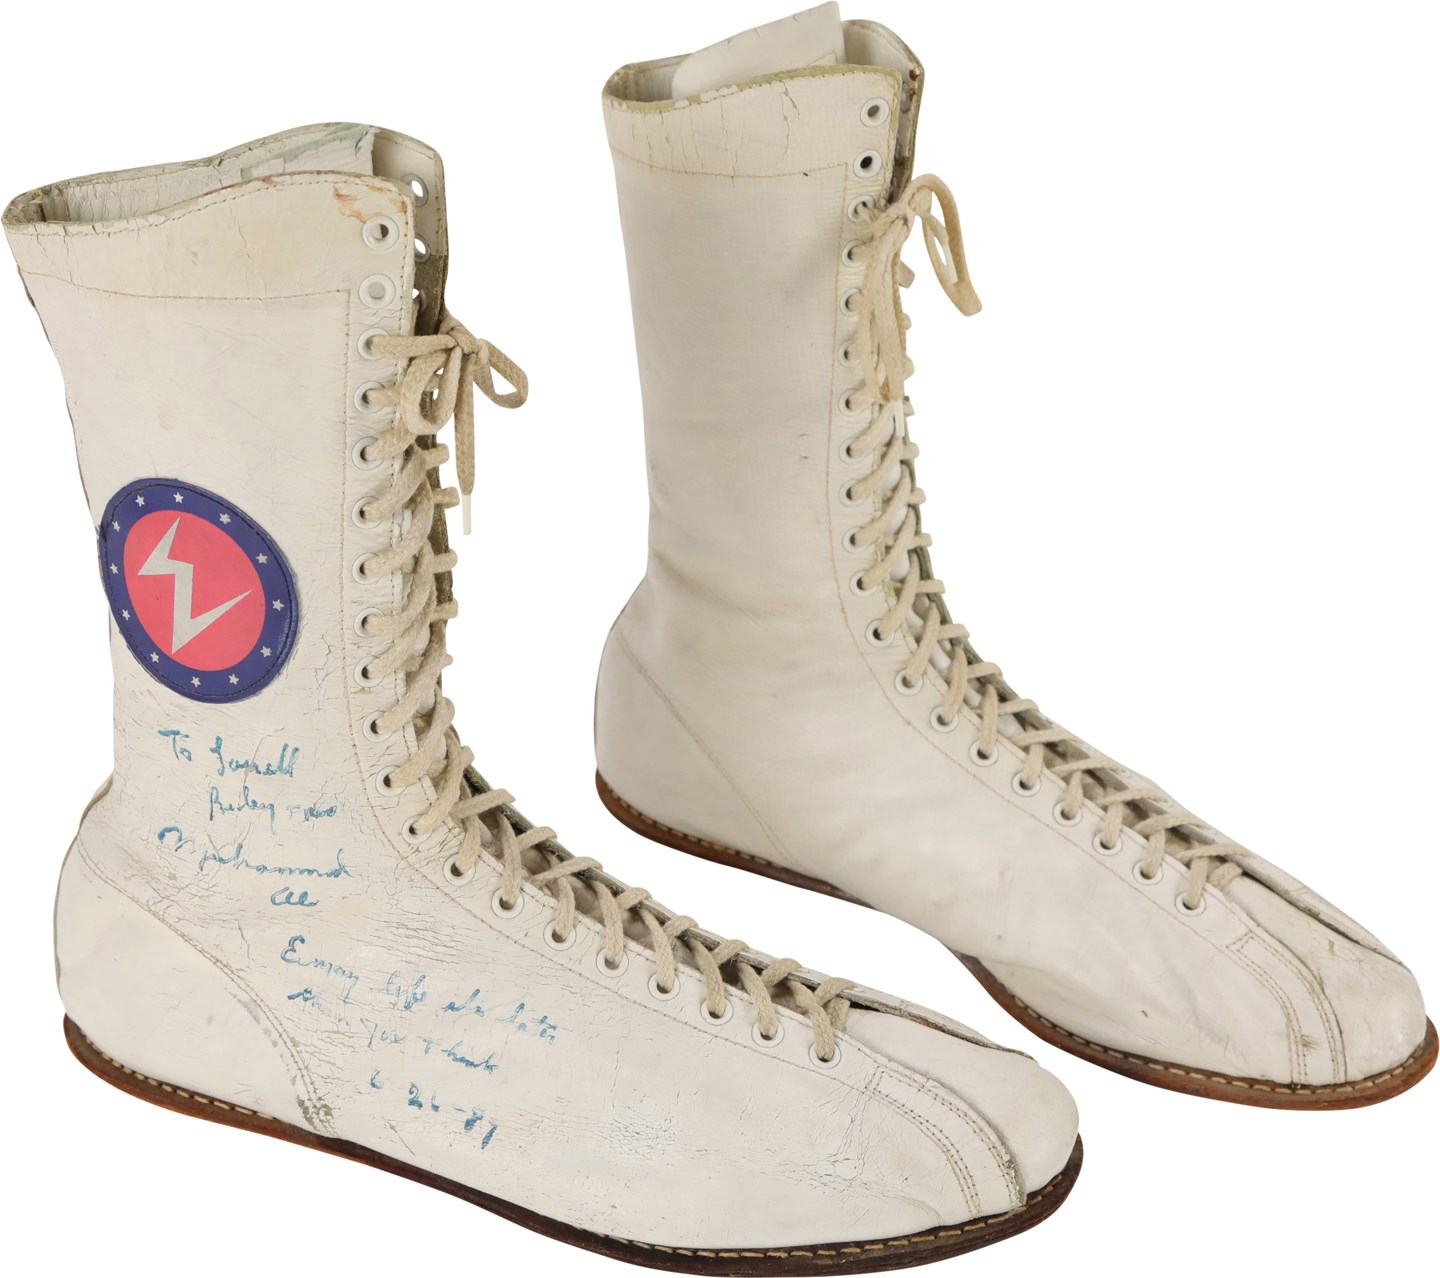 Muhammad Ali & Boxing - 1970s Muhammad Ali Worn and Signed Everlast Boxing Shoes (Gifted to Personal Photographer, Lowell Riley)